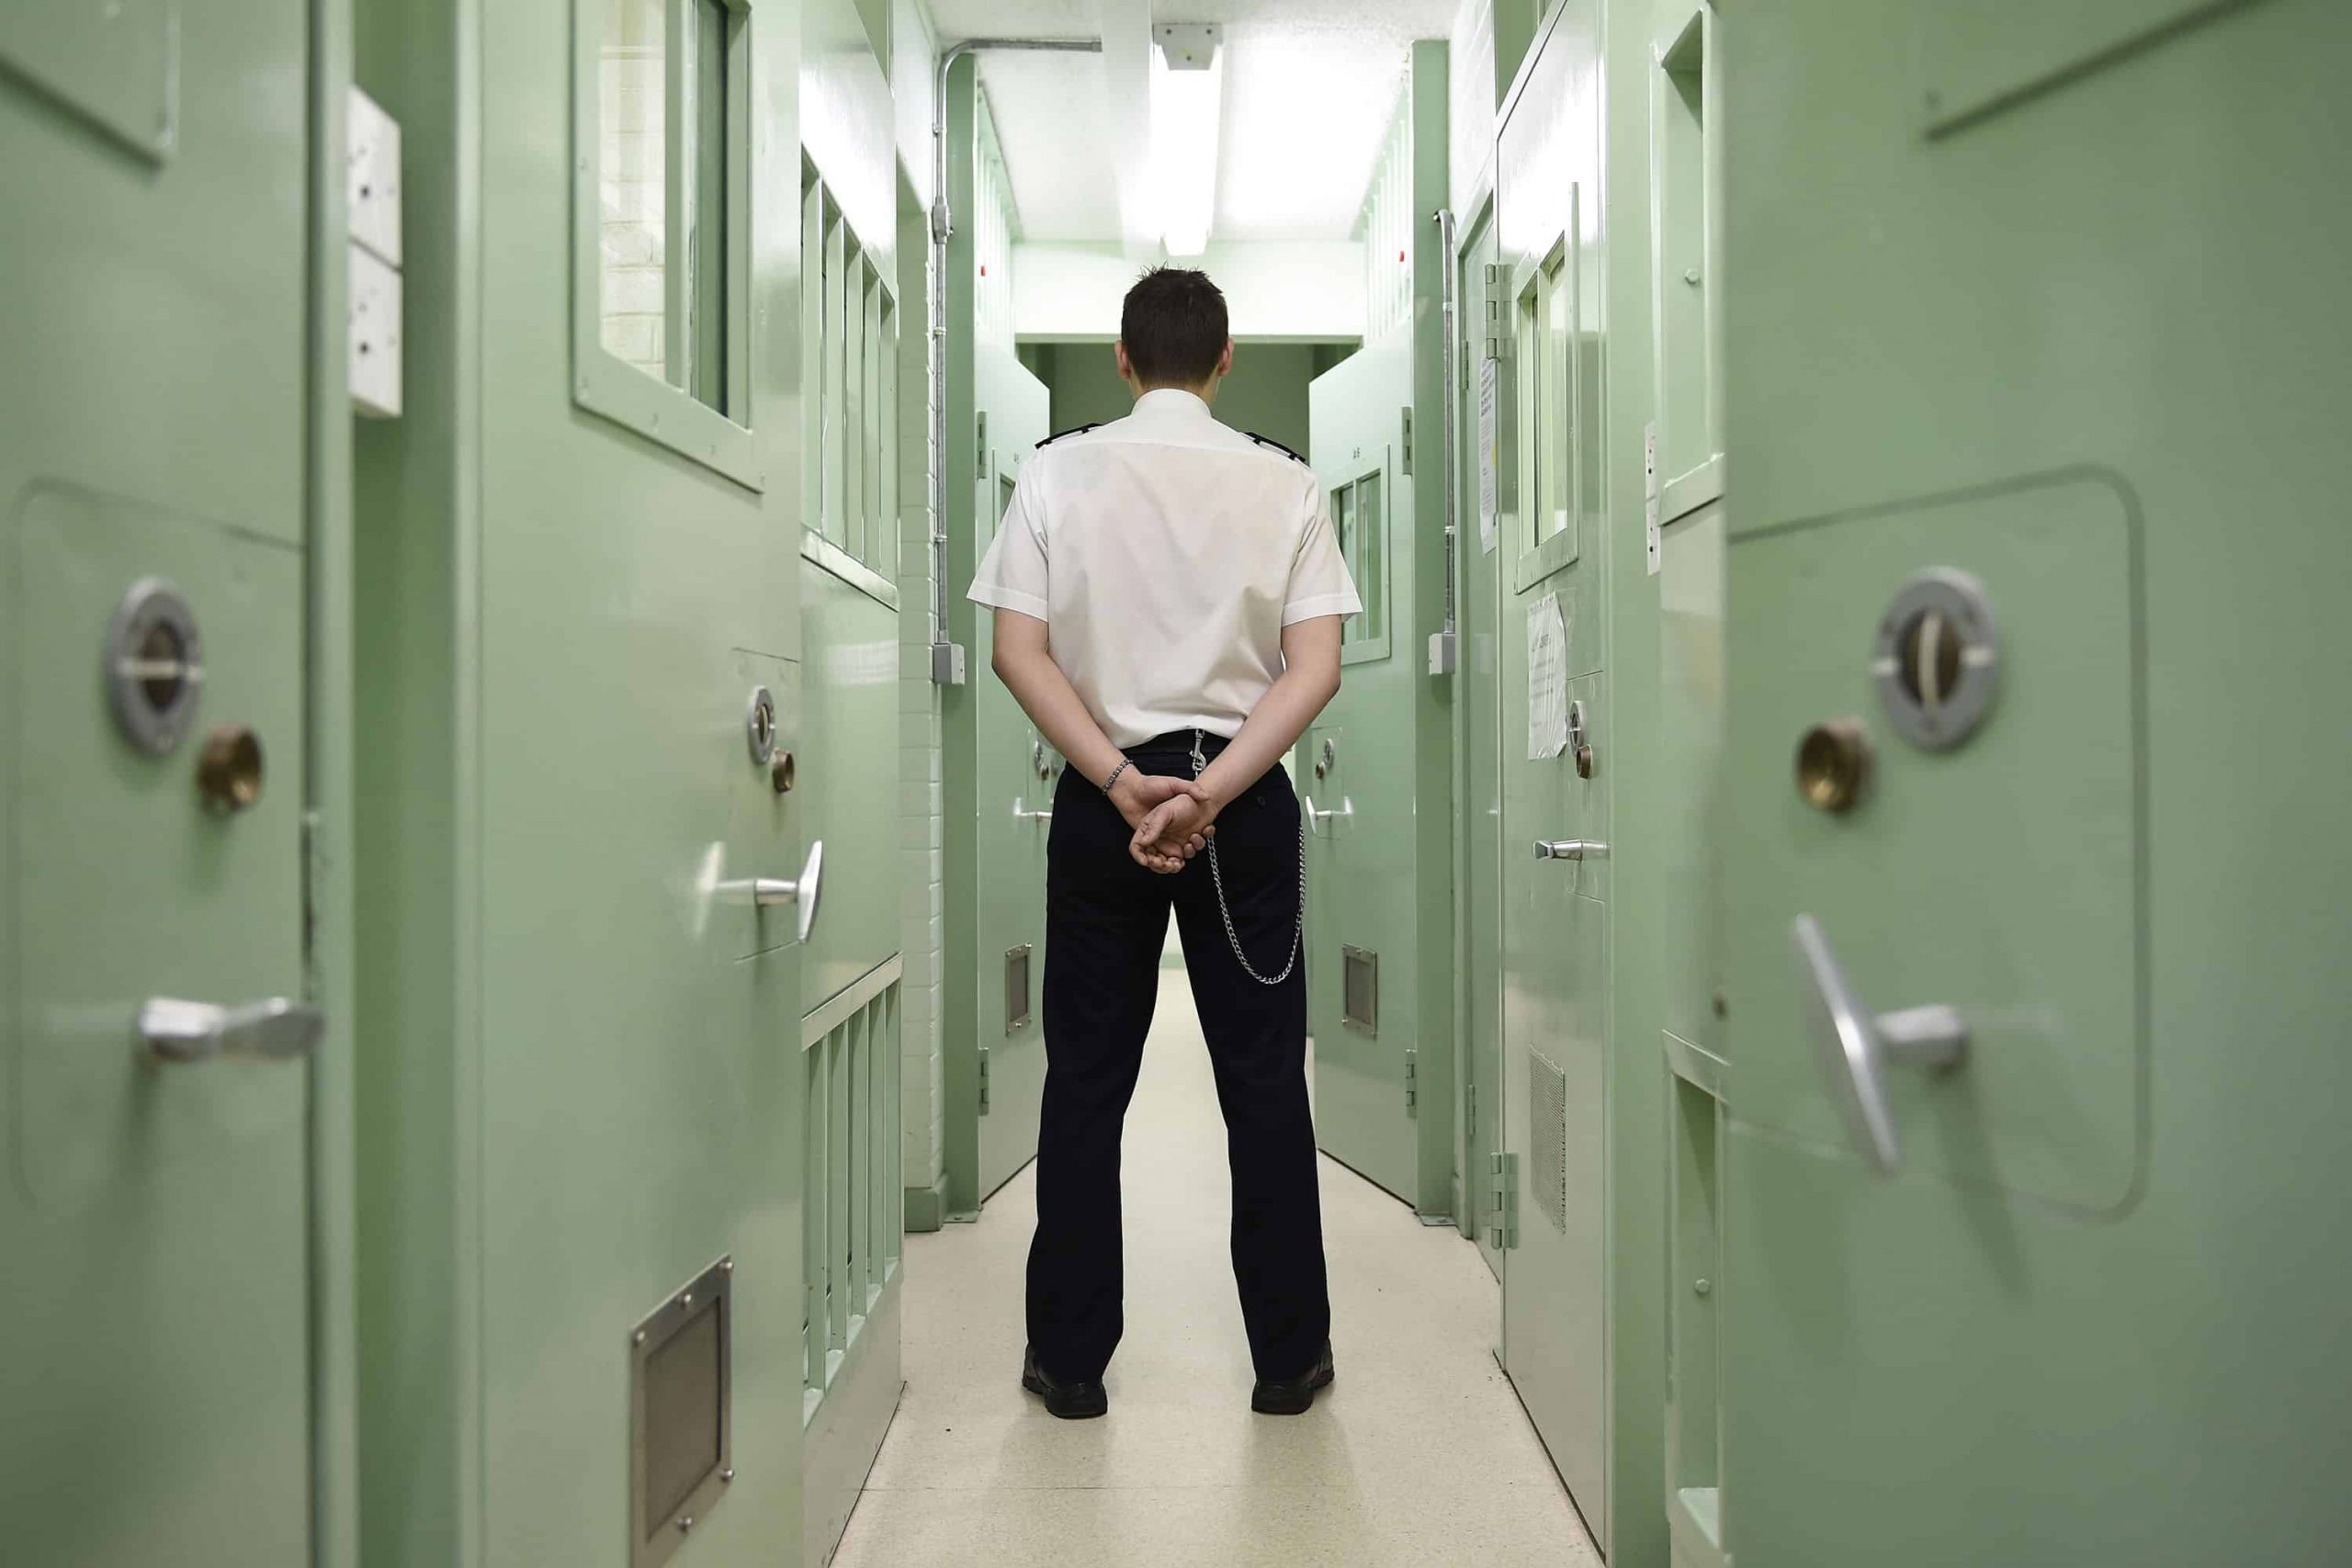 ‘Hidden crisis’ of record levels of self-harm in prison